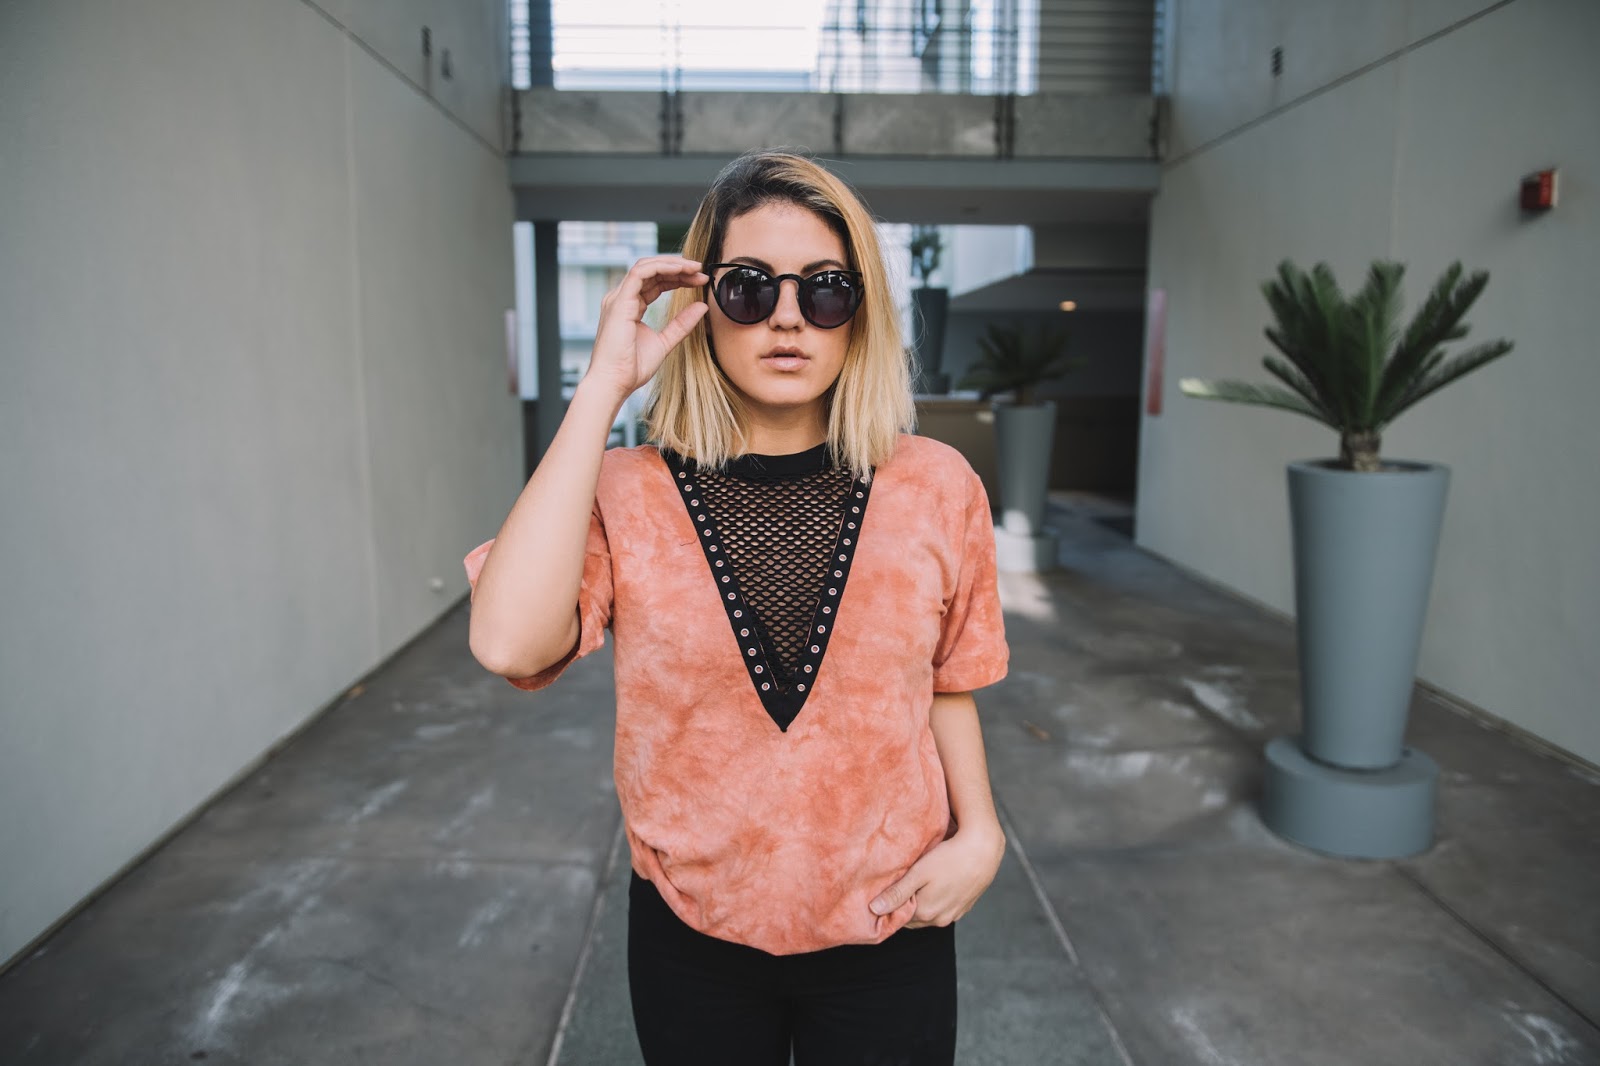 Forever 21 Crystal-Dye Plunging Tee